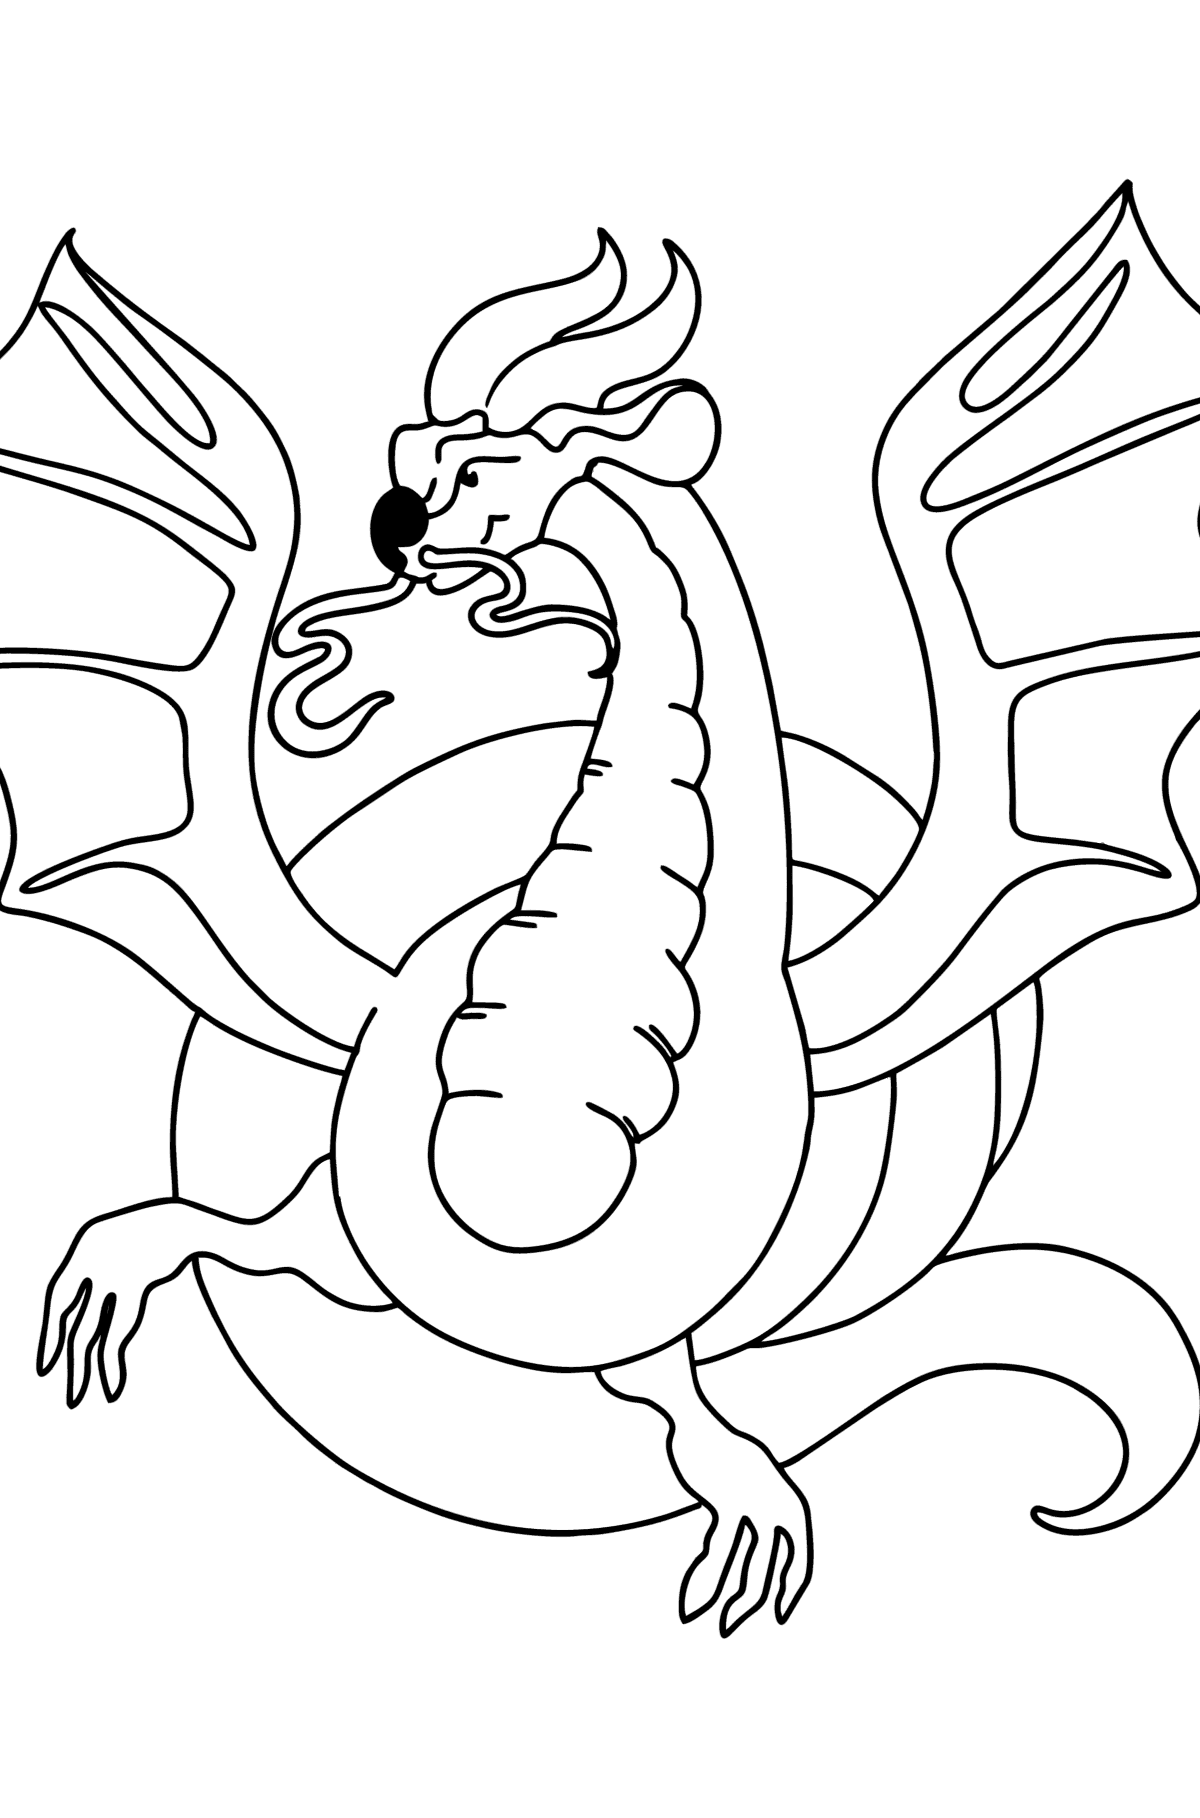 Dangerous Dragon coloring page - Coloring Pages for Kids